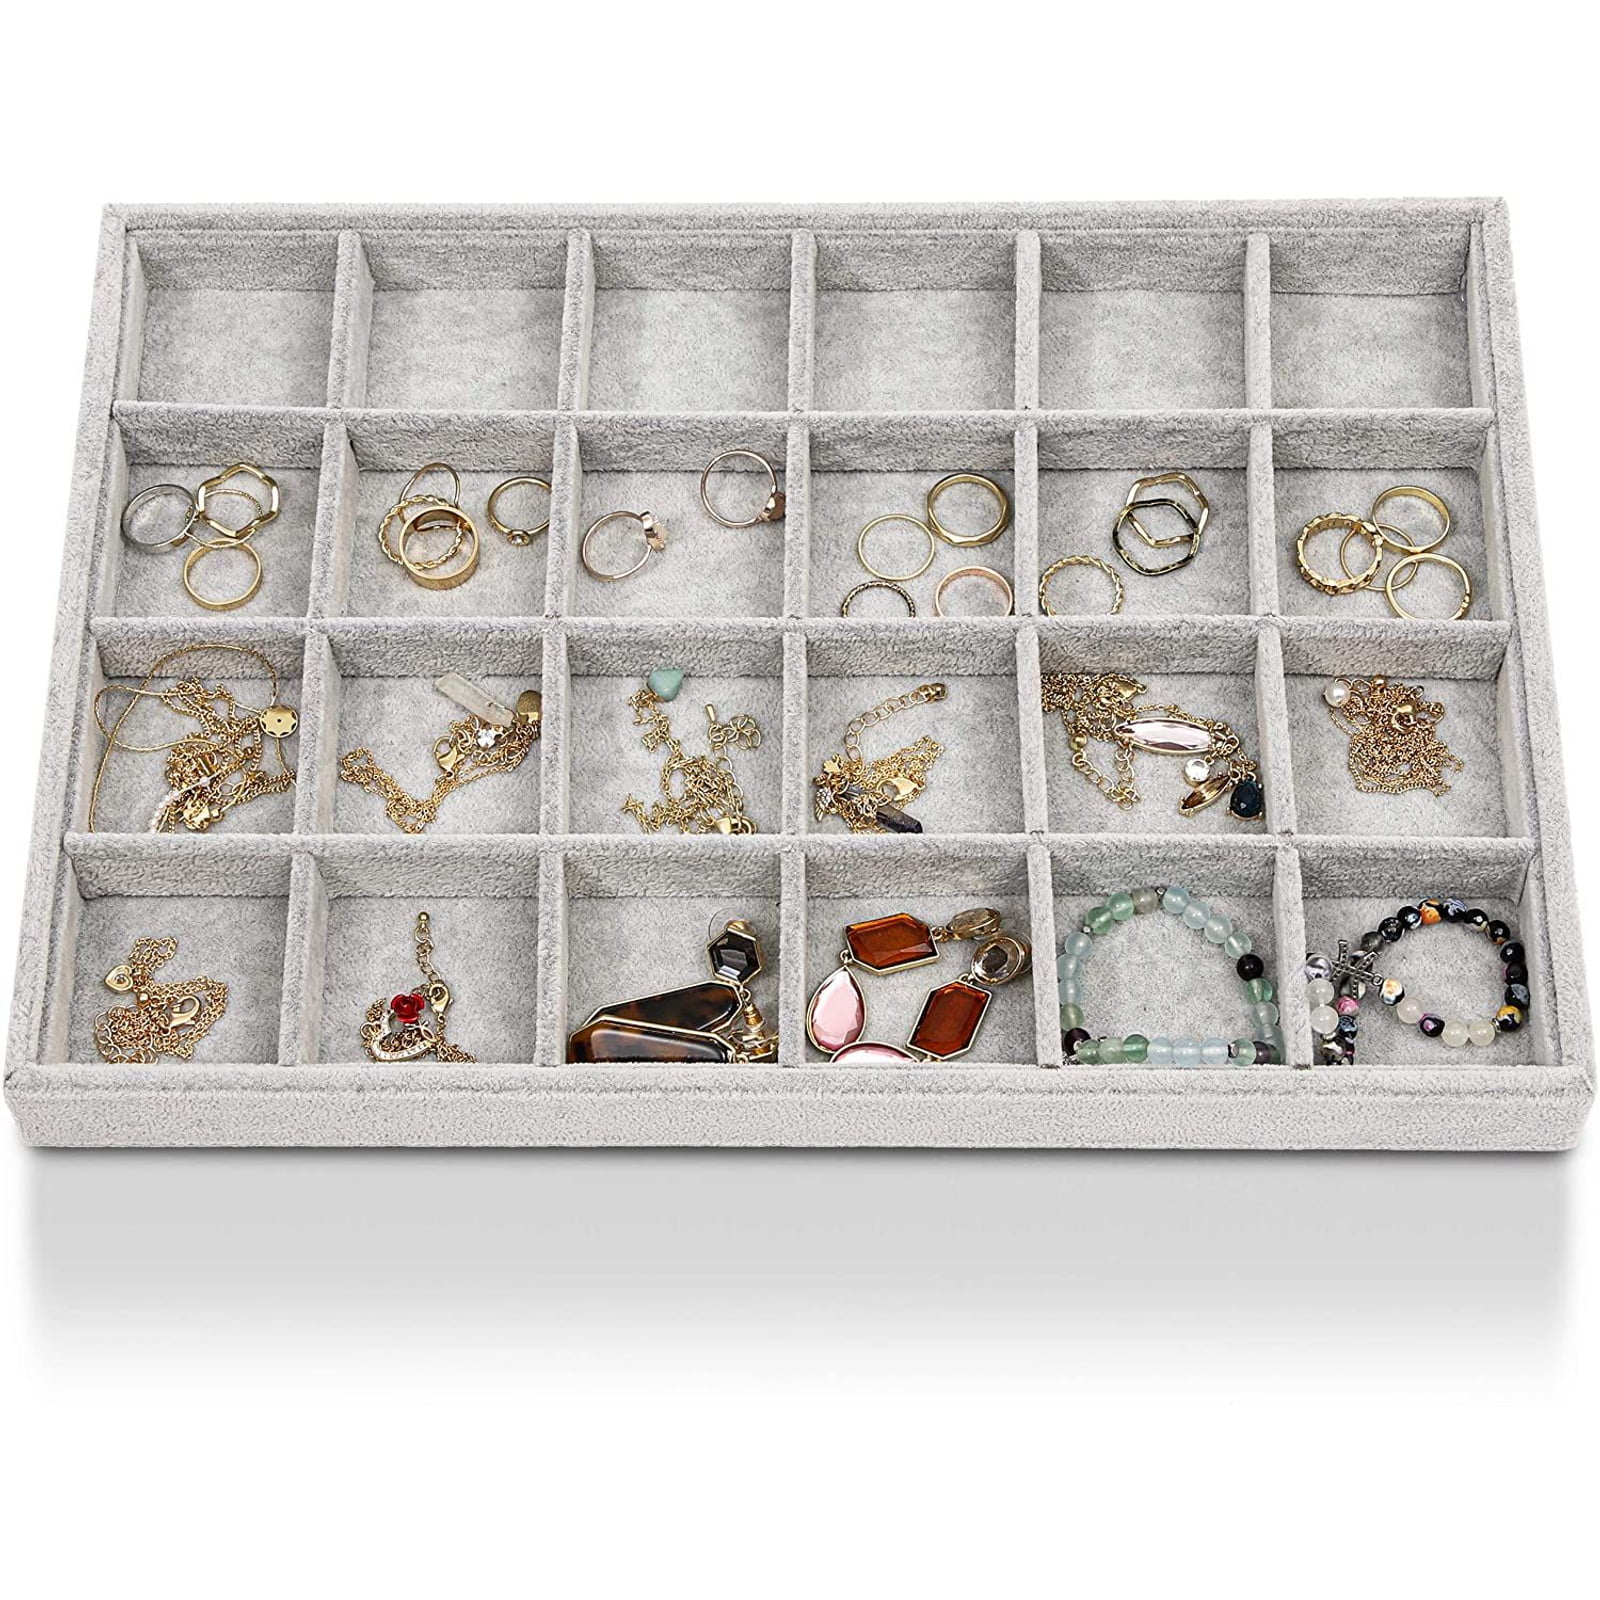 2 White Insert Tray Liners W/ 20 Compartments Drawer Organizer Jewelry Displays 